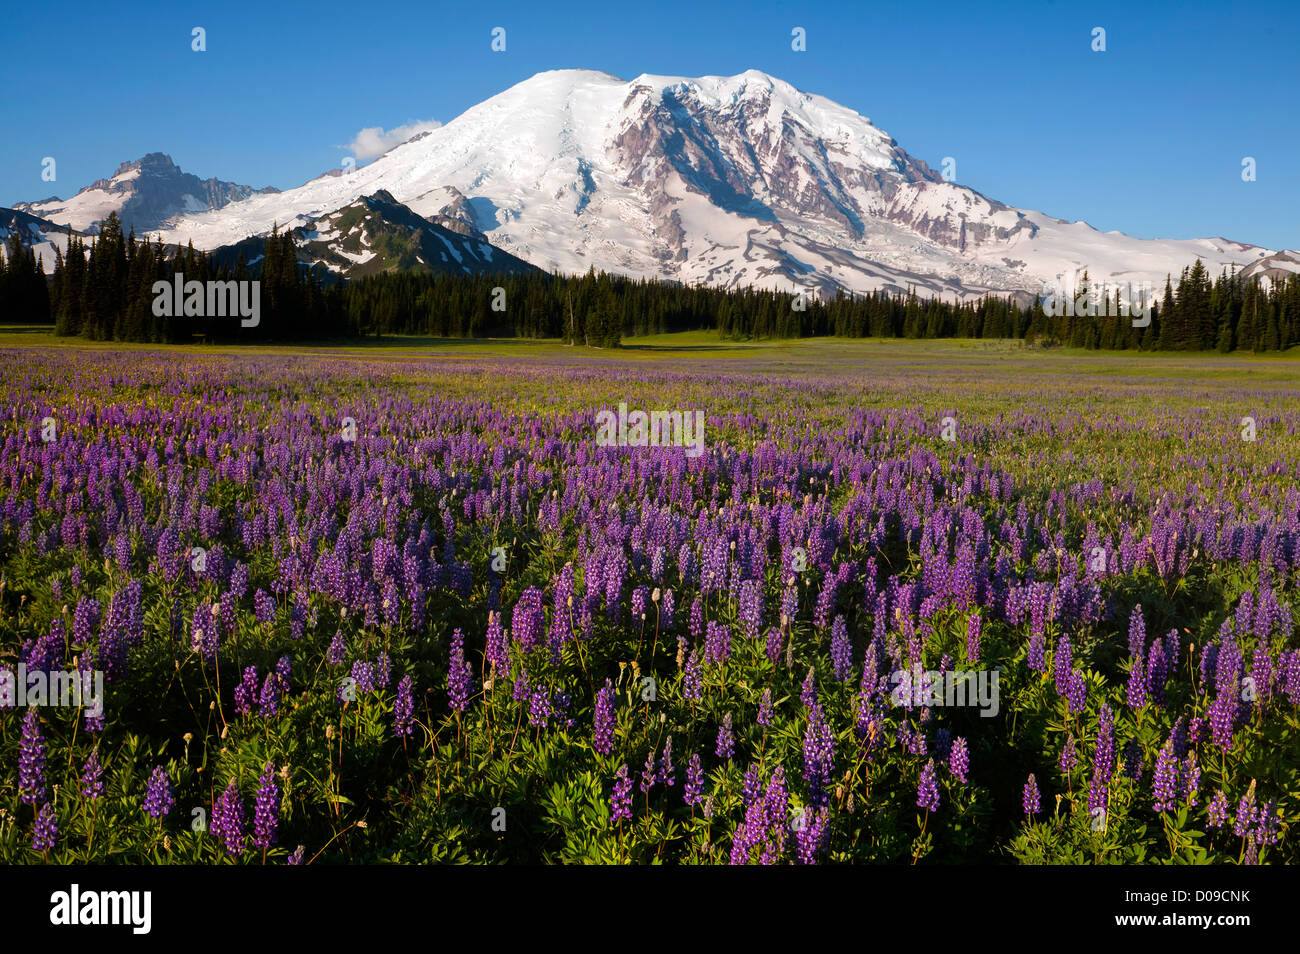 WA06960-00...WASHINGTON - Lupine covered meadow at Grand Park and Mount Rainier in Mount Rainier National Park. Stock Photo